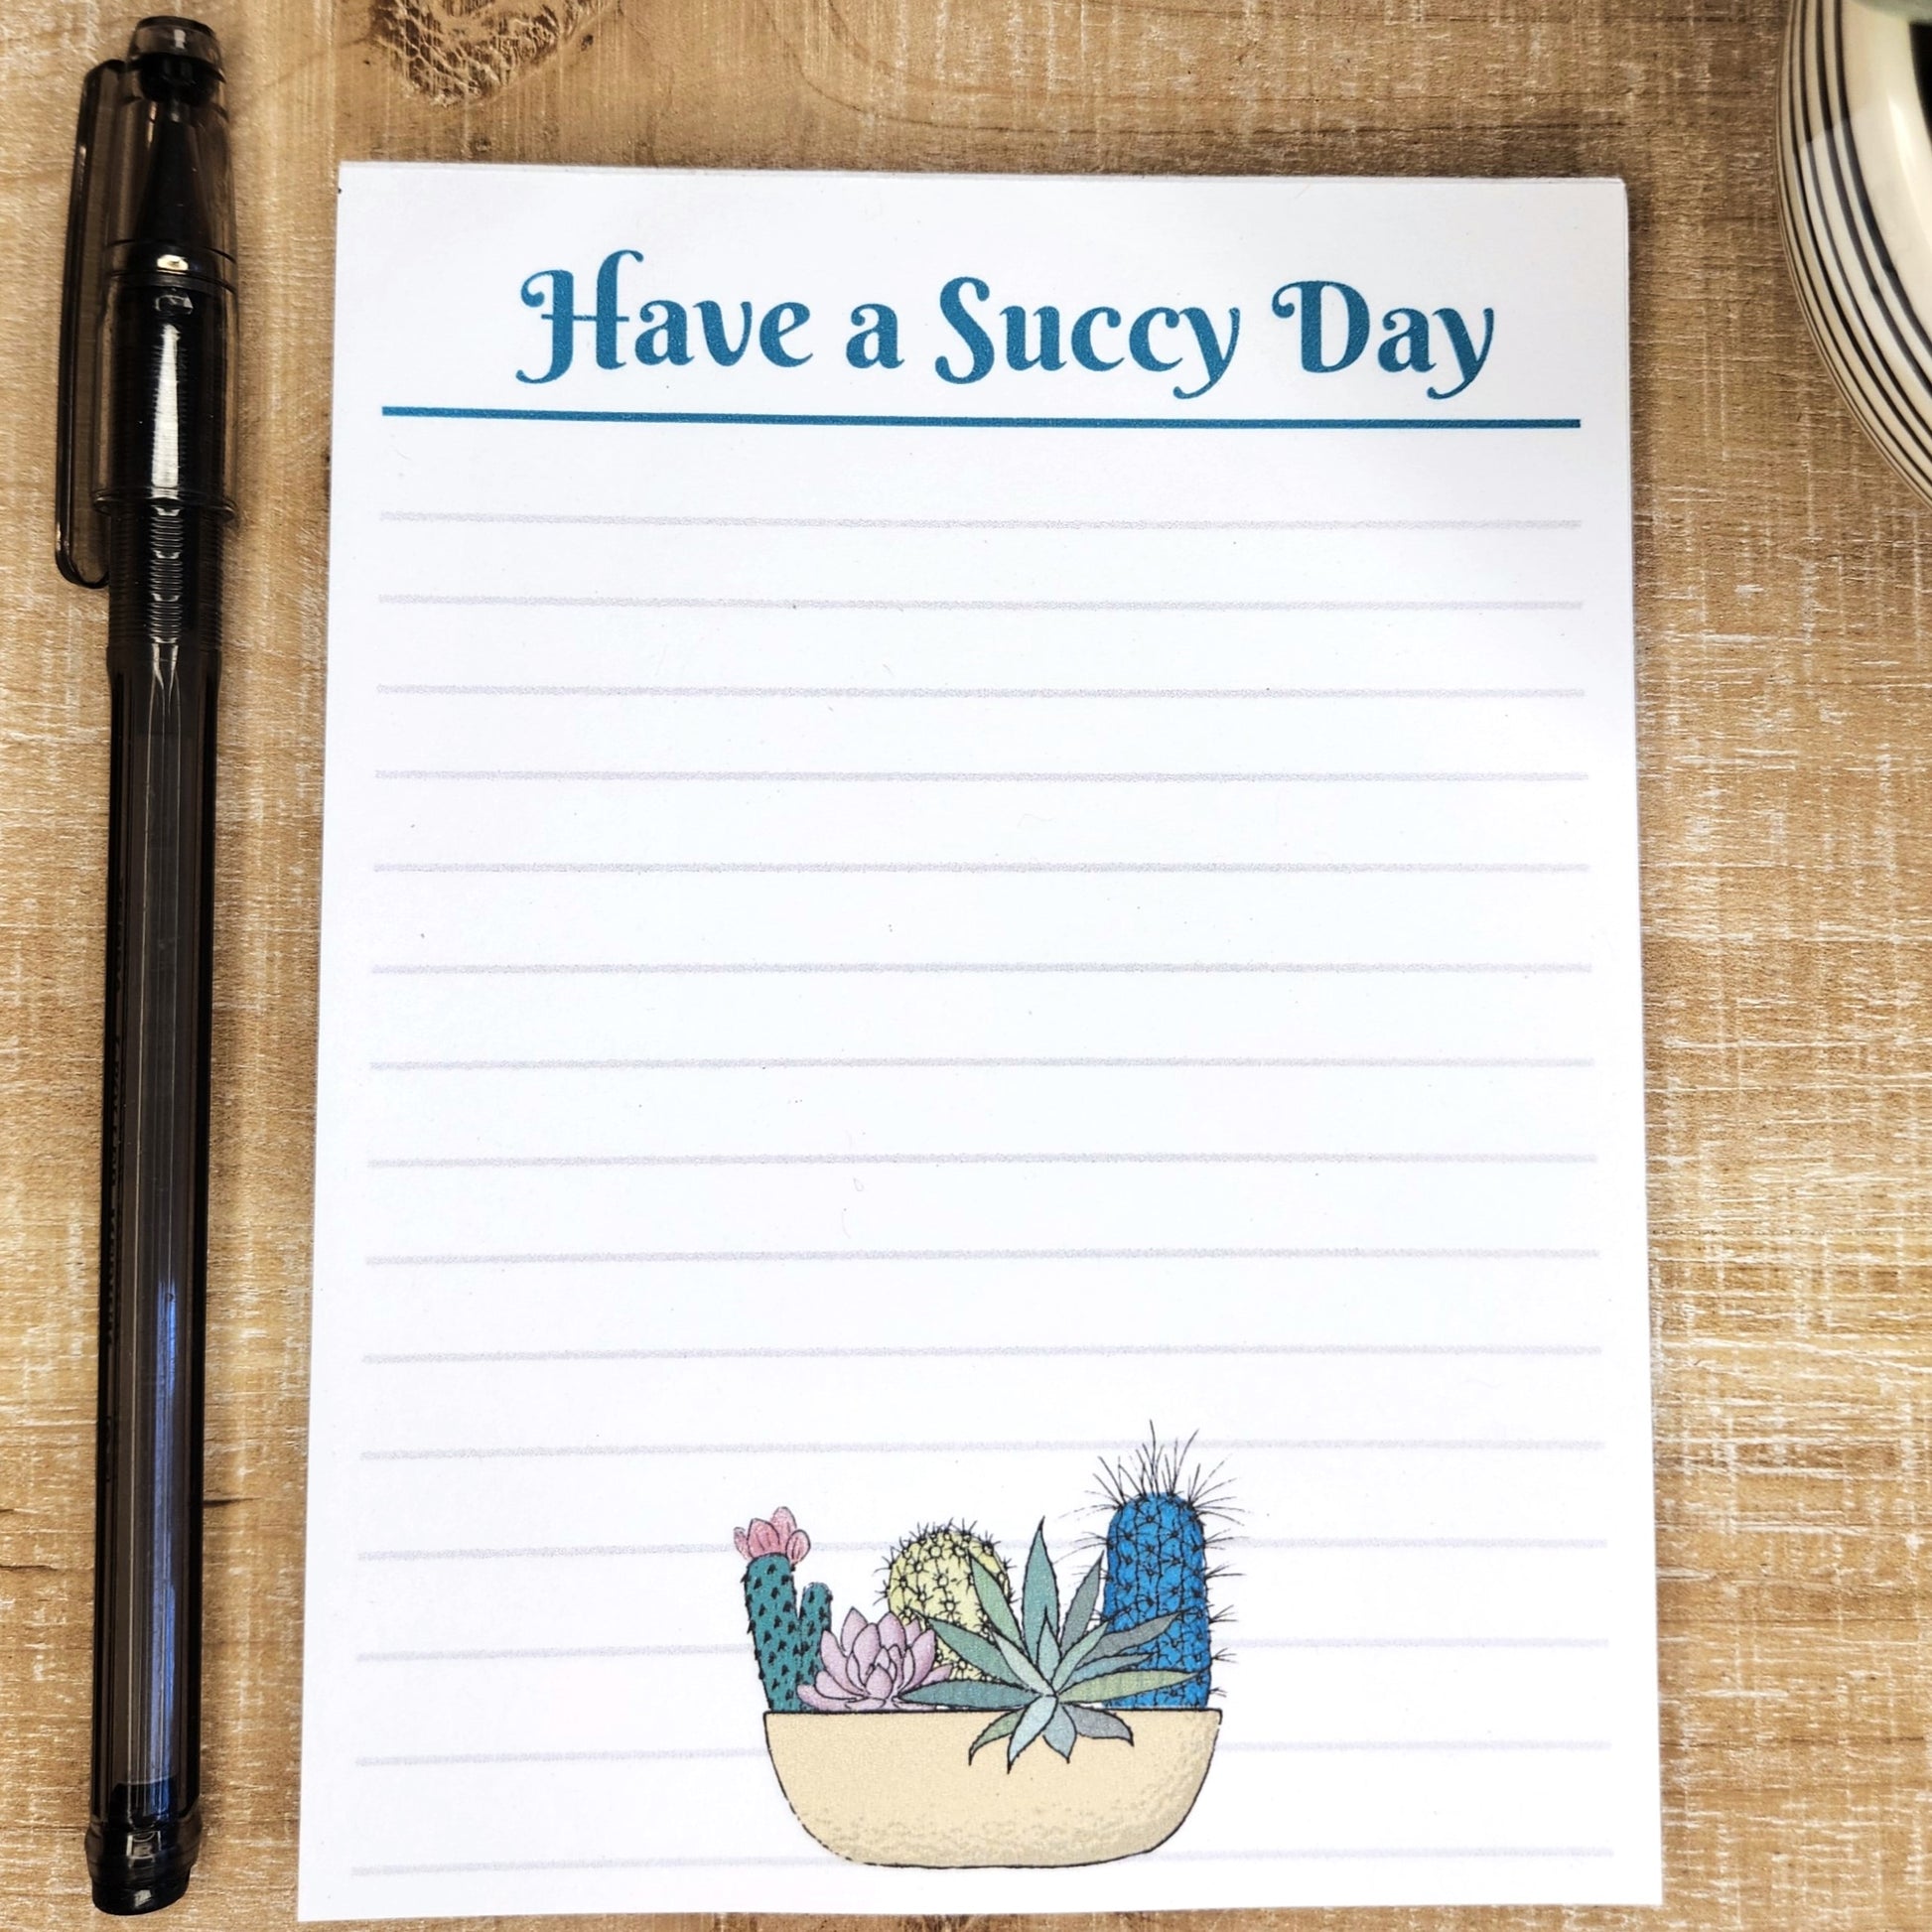 Have a Succy Day notepad is on a tan background. notepad has lines and a bowl of succulents on the bottom.